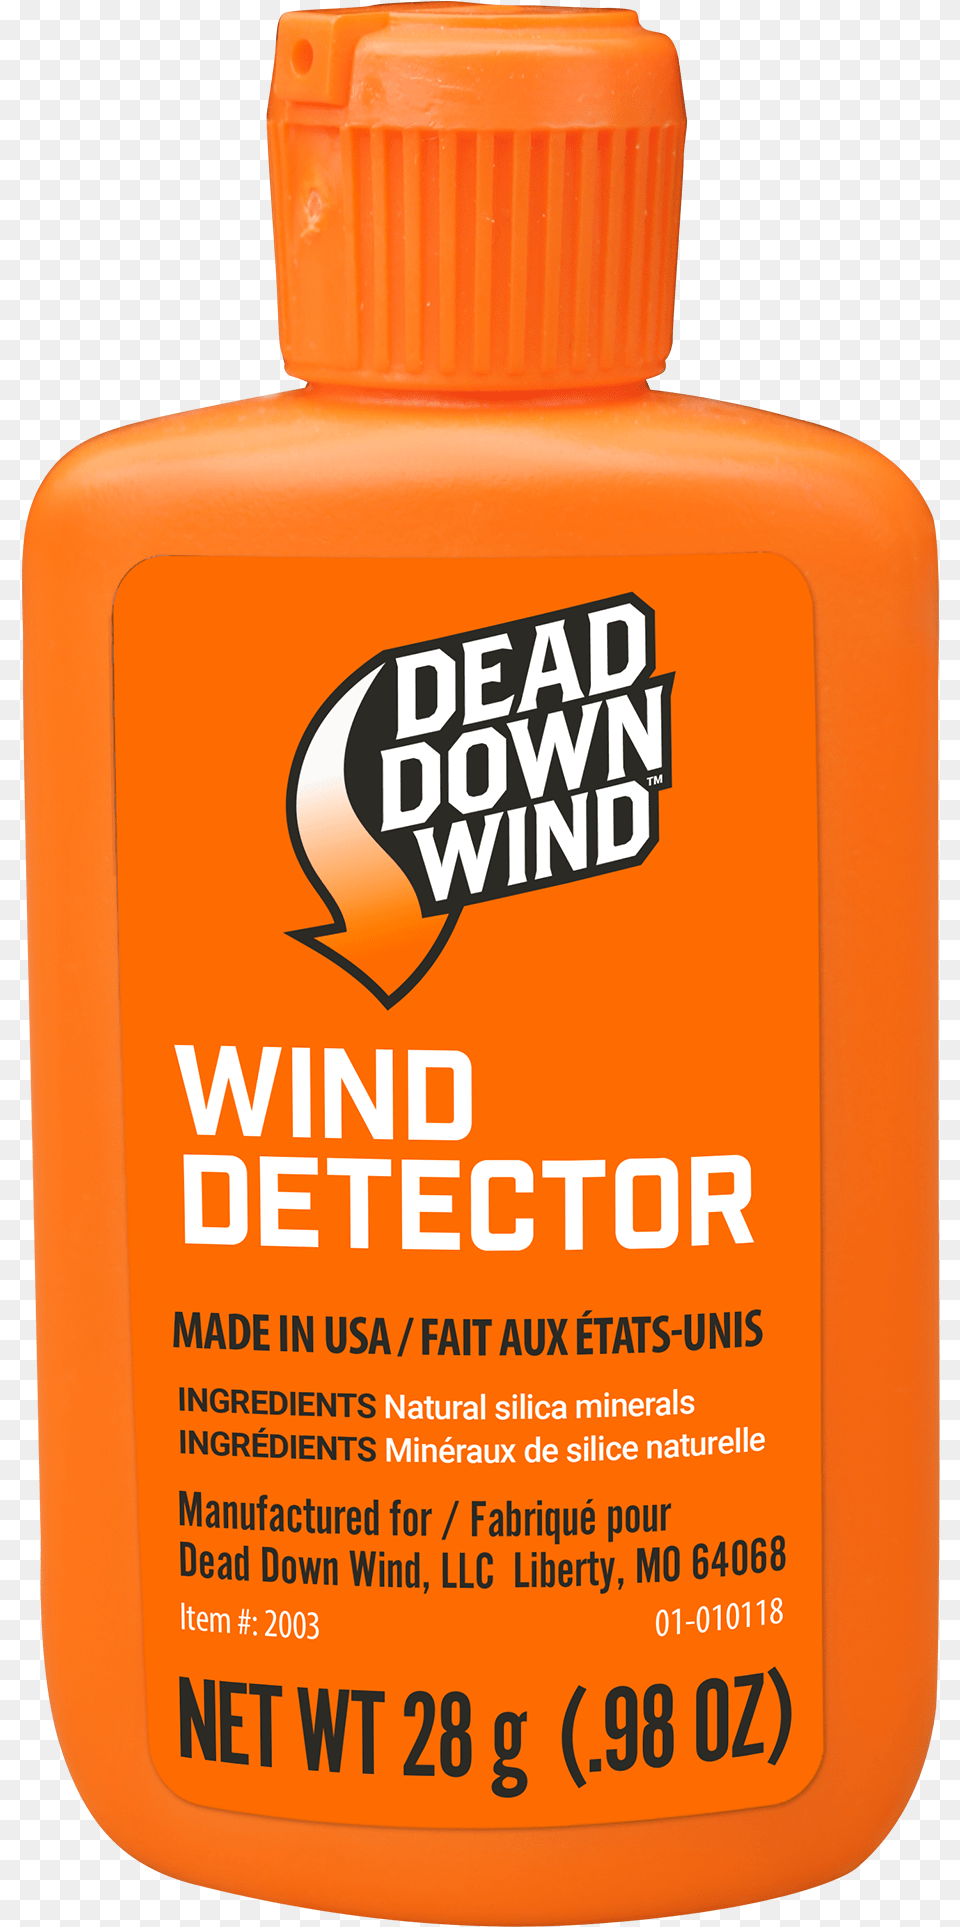 Dead Down Wind Wind Detector, Bottle, Cosmetics, Sunscreen, Shaker Free Transparent Png